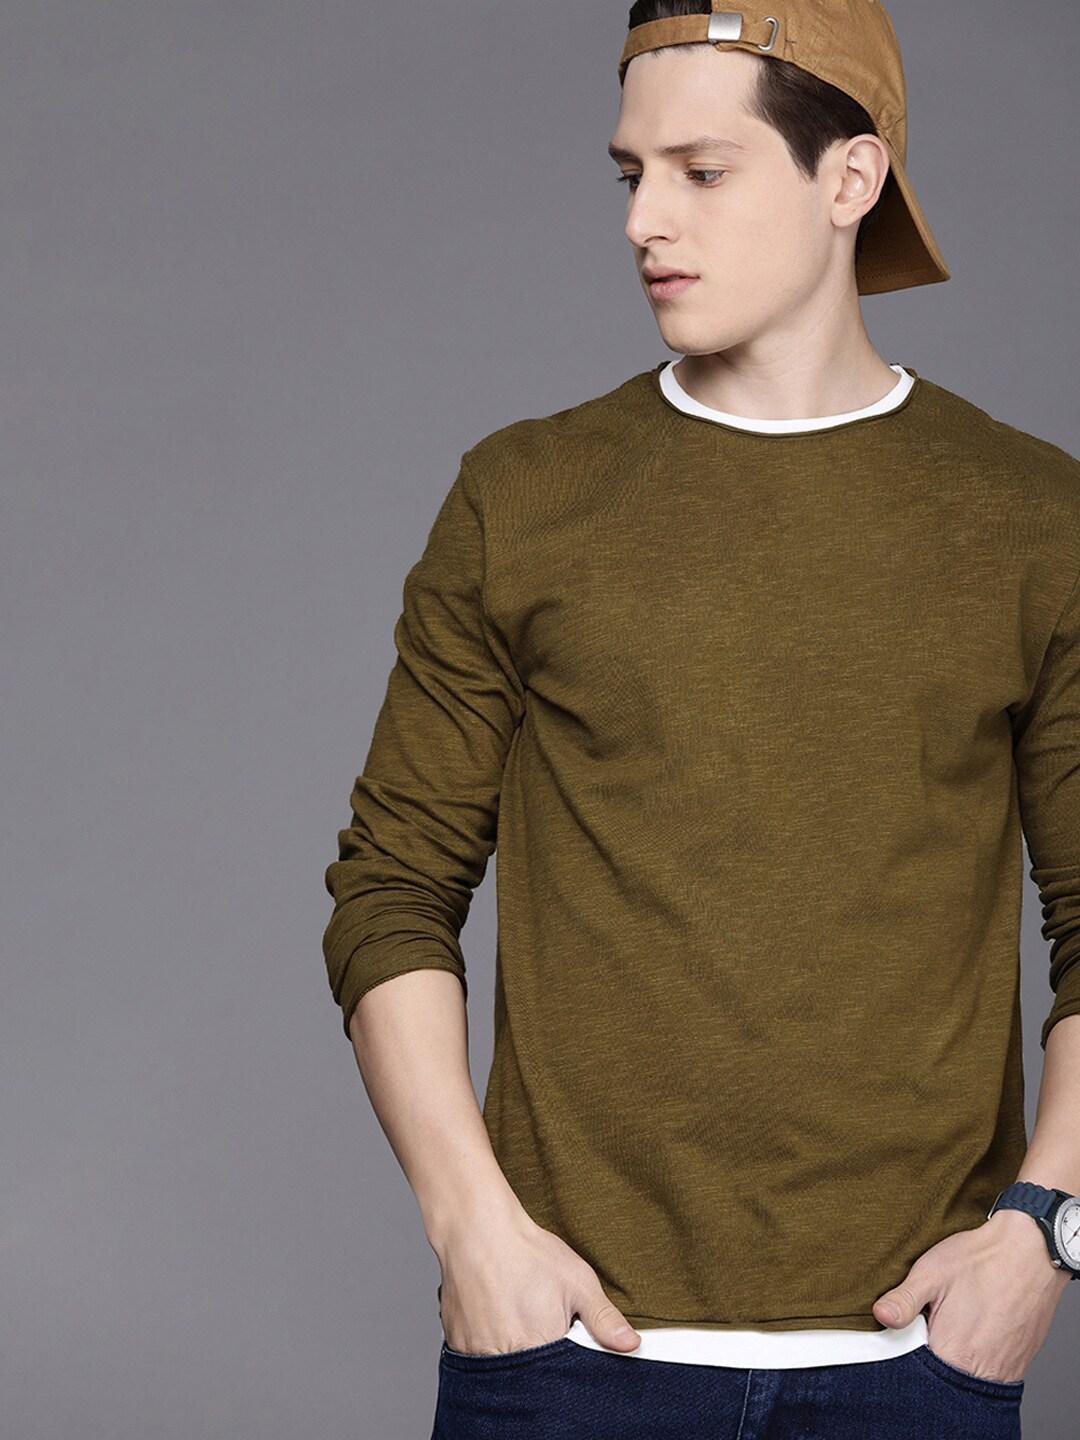 Voi Jeans Men Olive Green Contrast Taping T-shirt